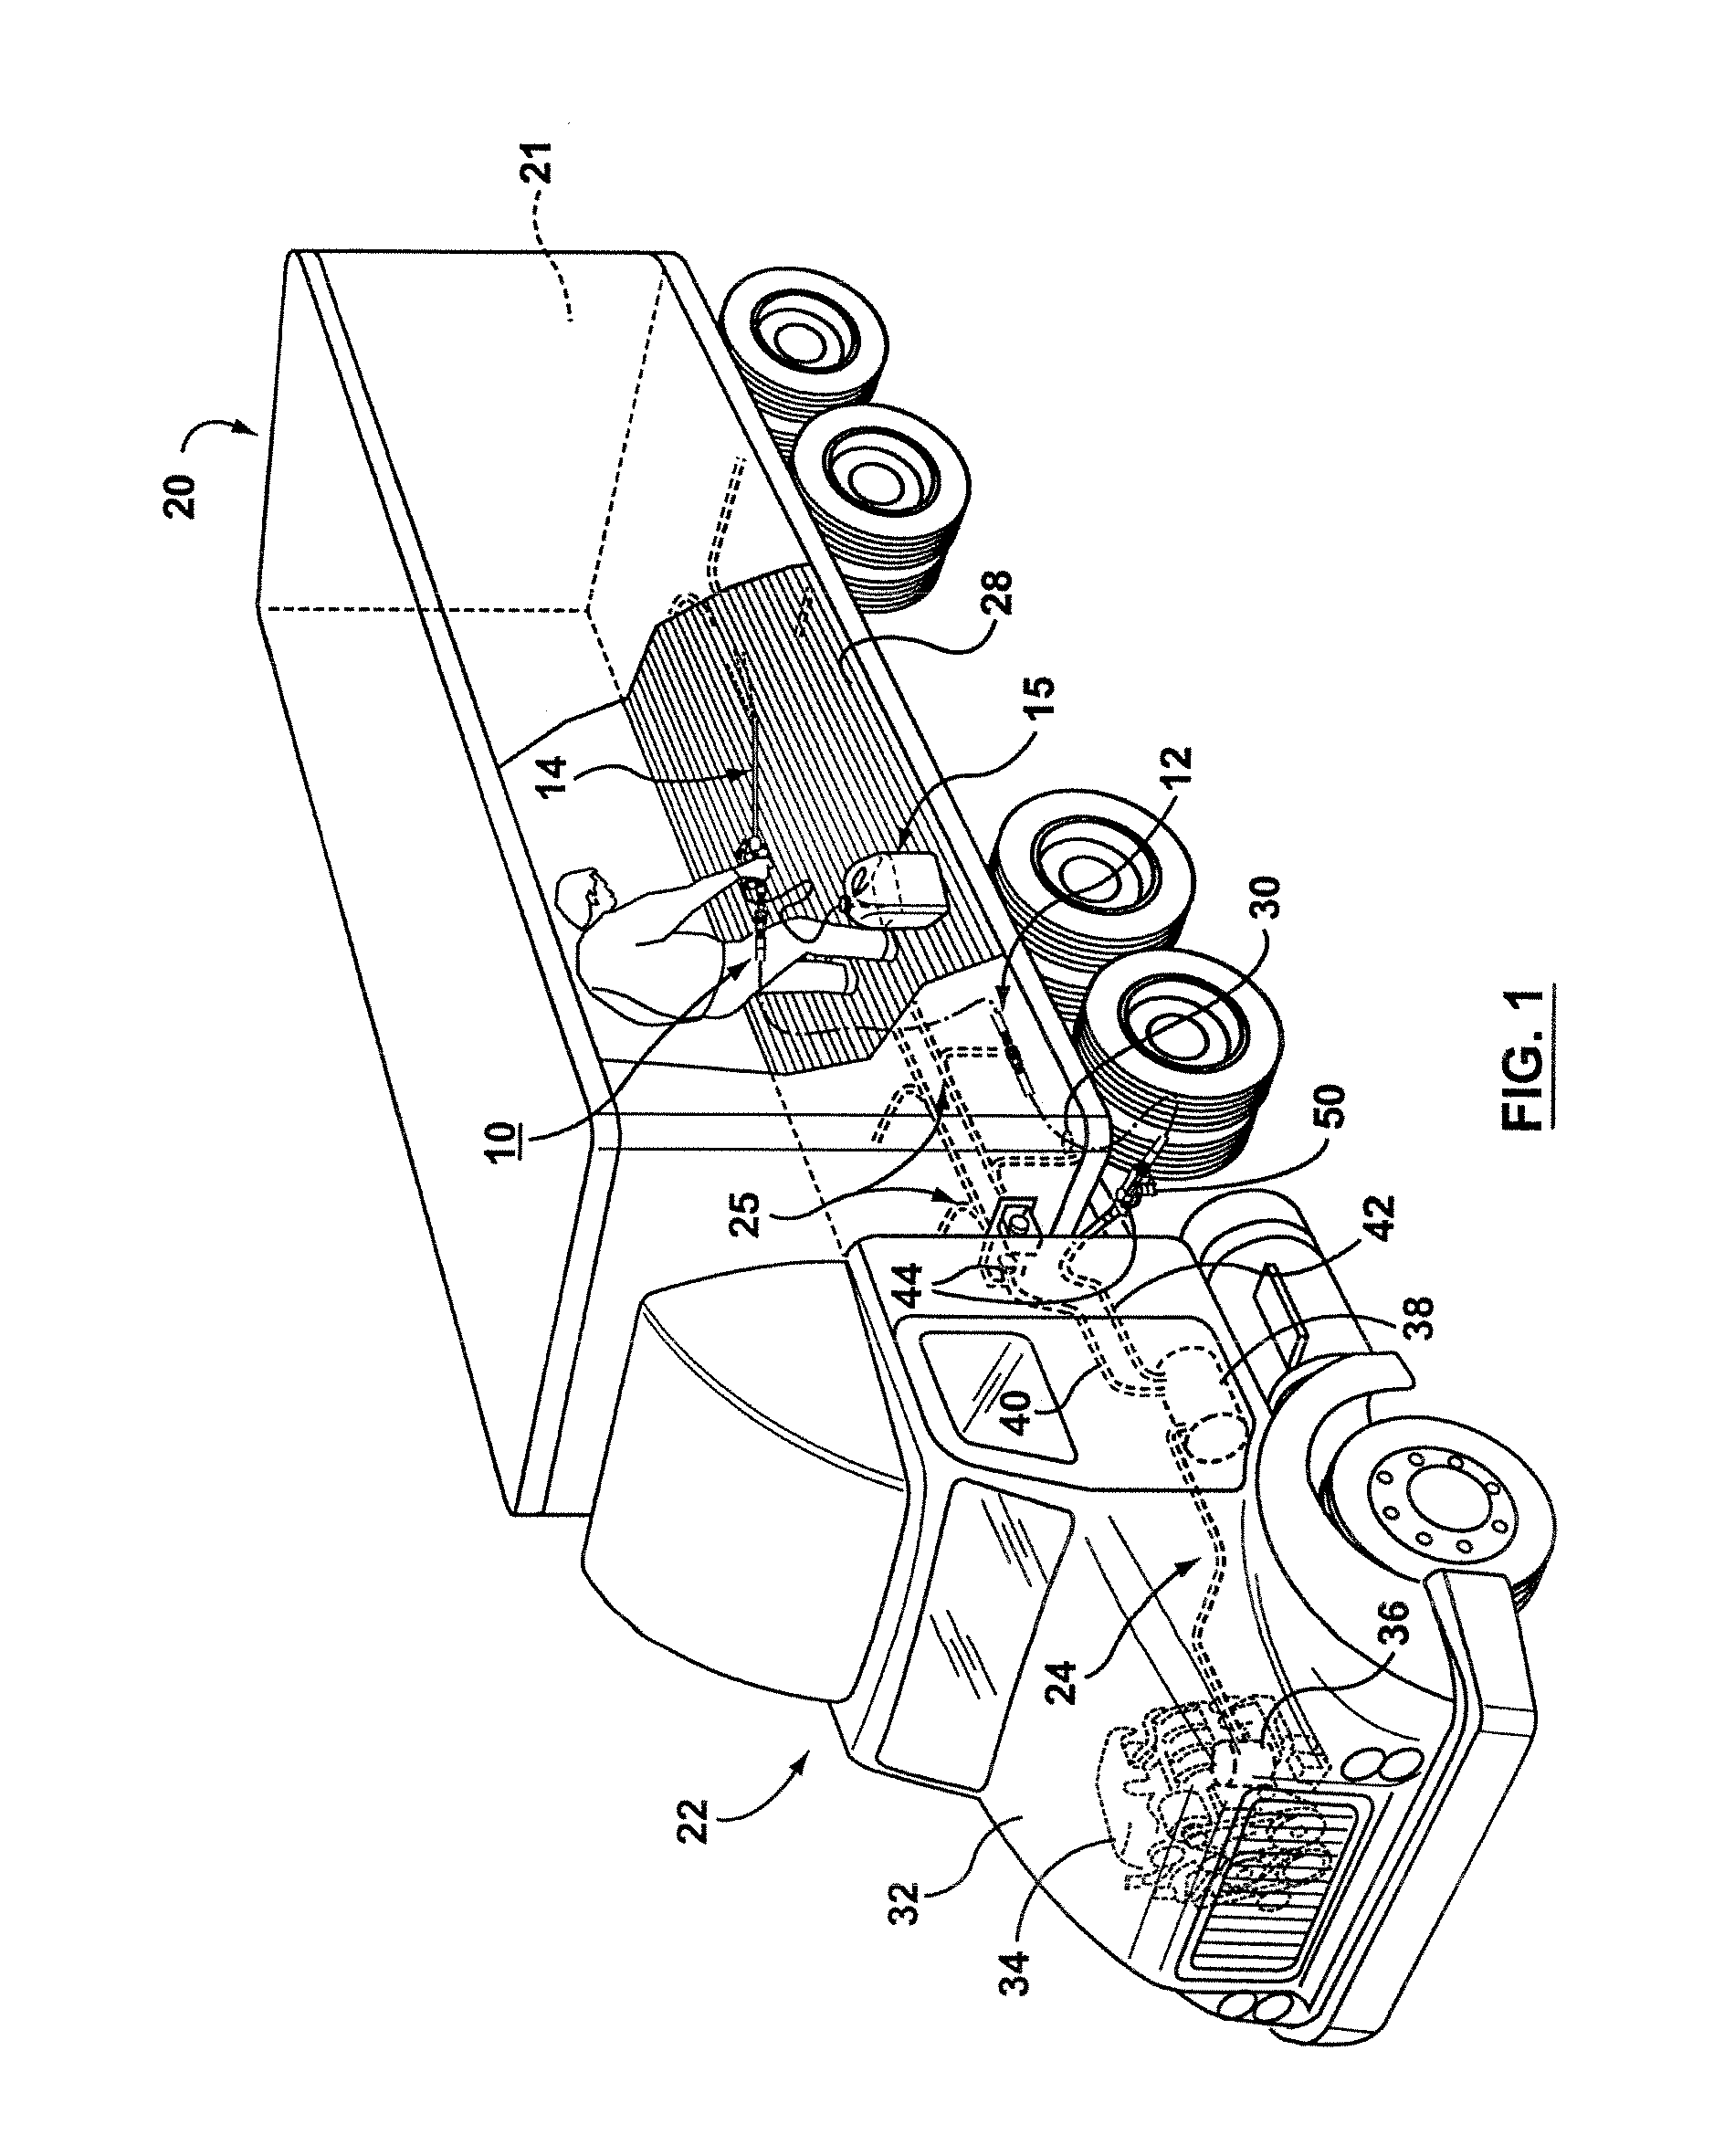 Apparatus and method for cleaning the interior of transport truck trailers